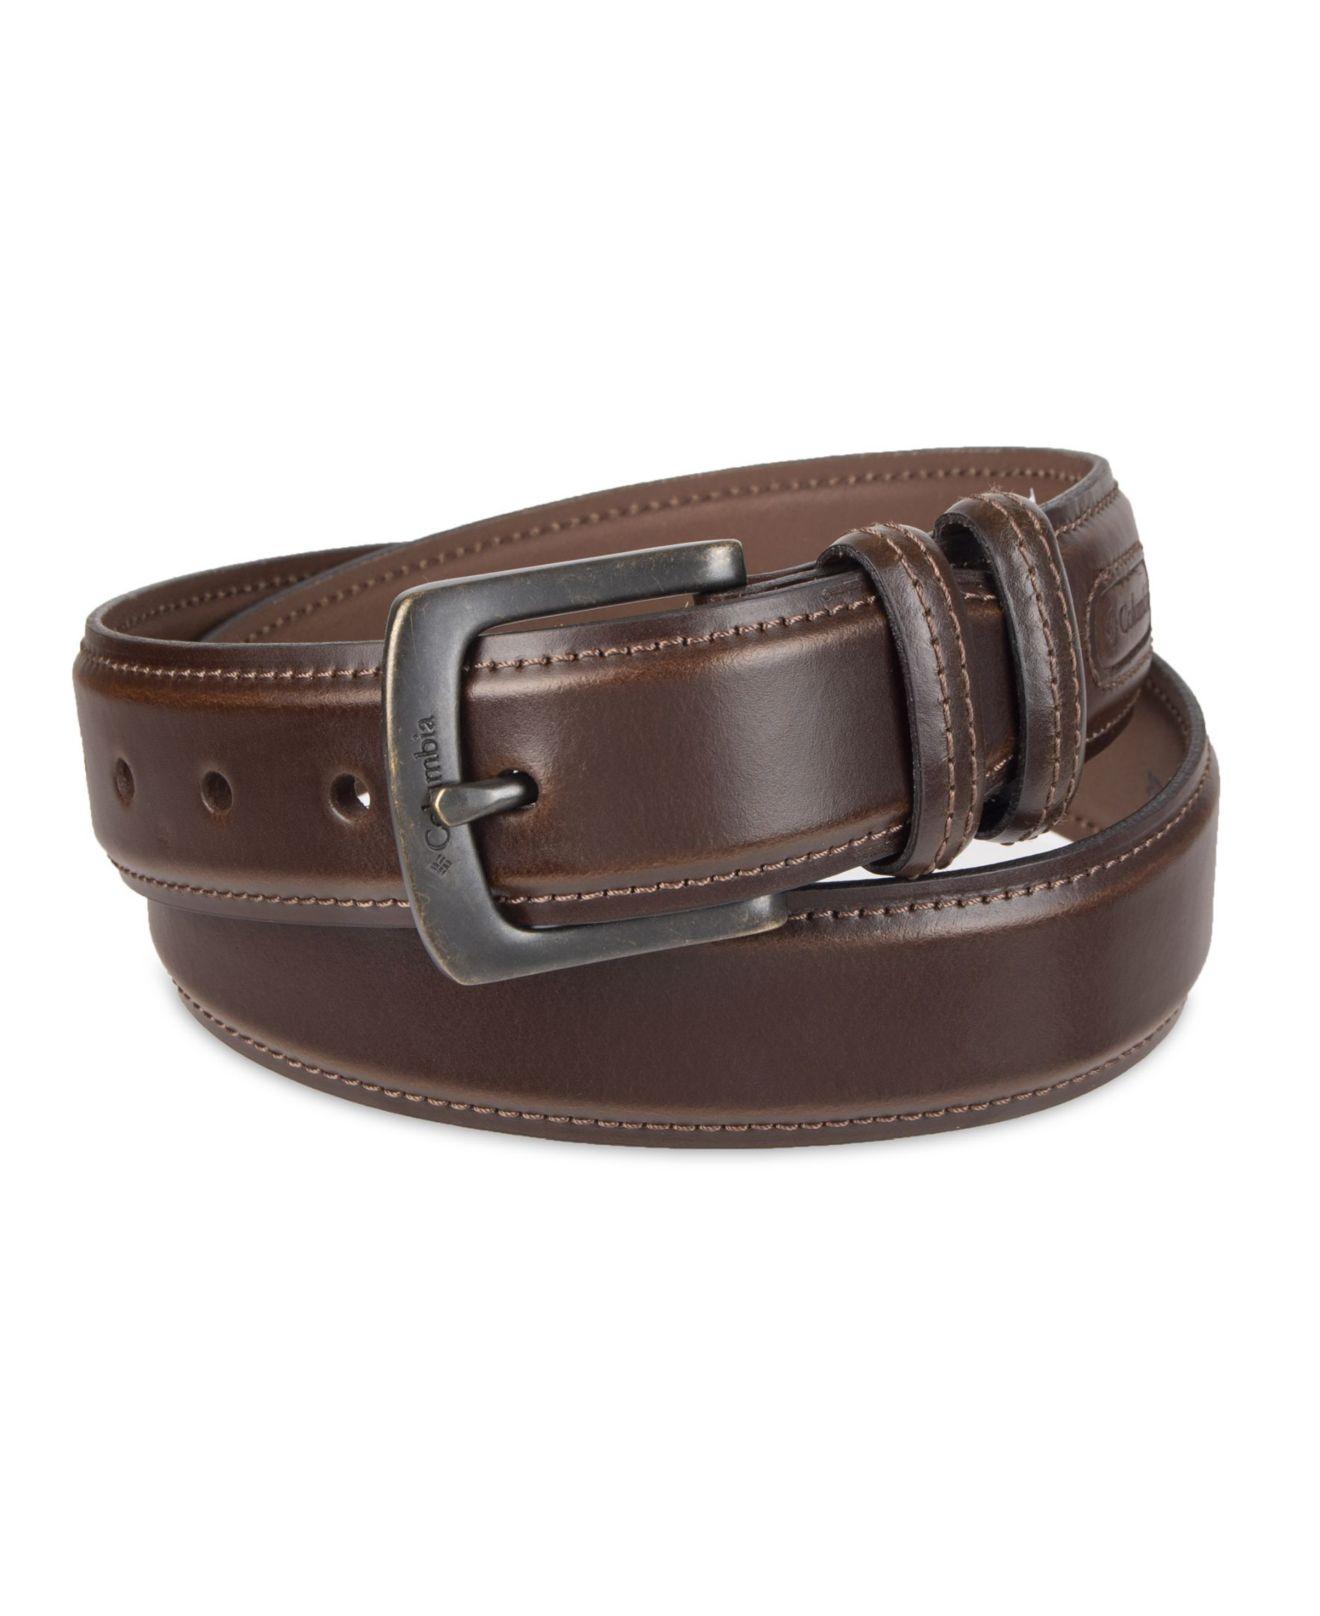 Columbia Leather Belt in Brown for Men - Lyst